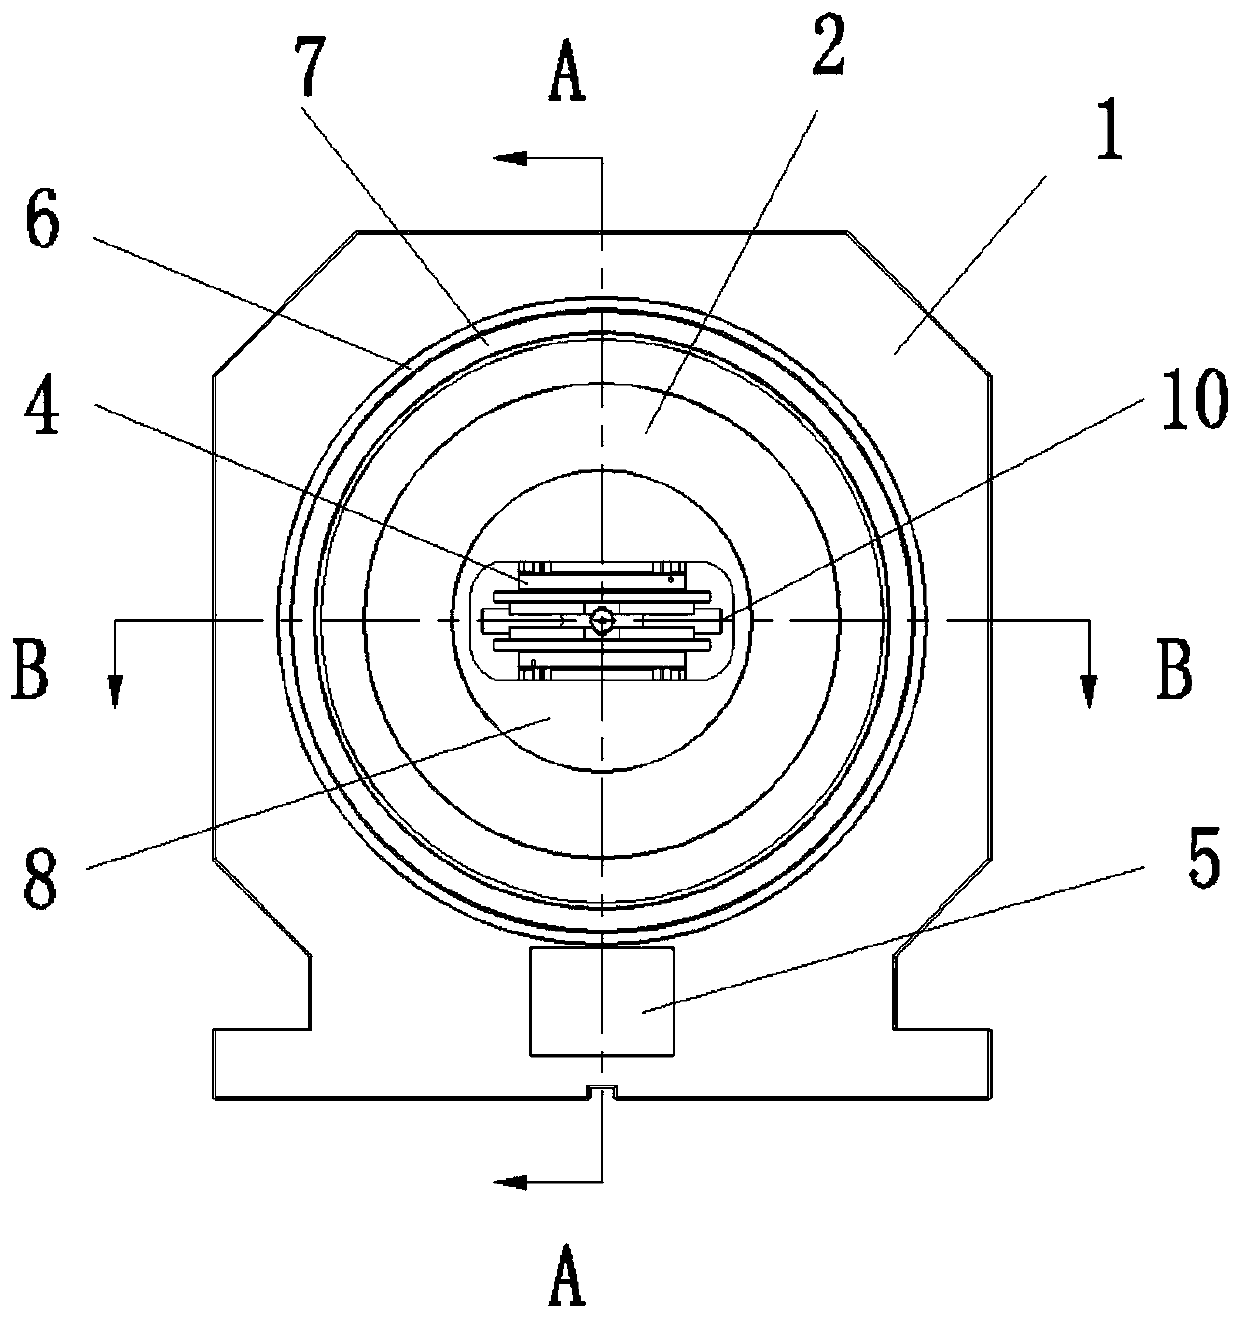 A self-centering two-way rotating cross-axis machining spindle